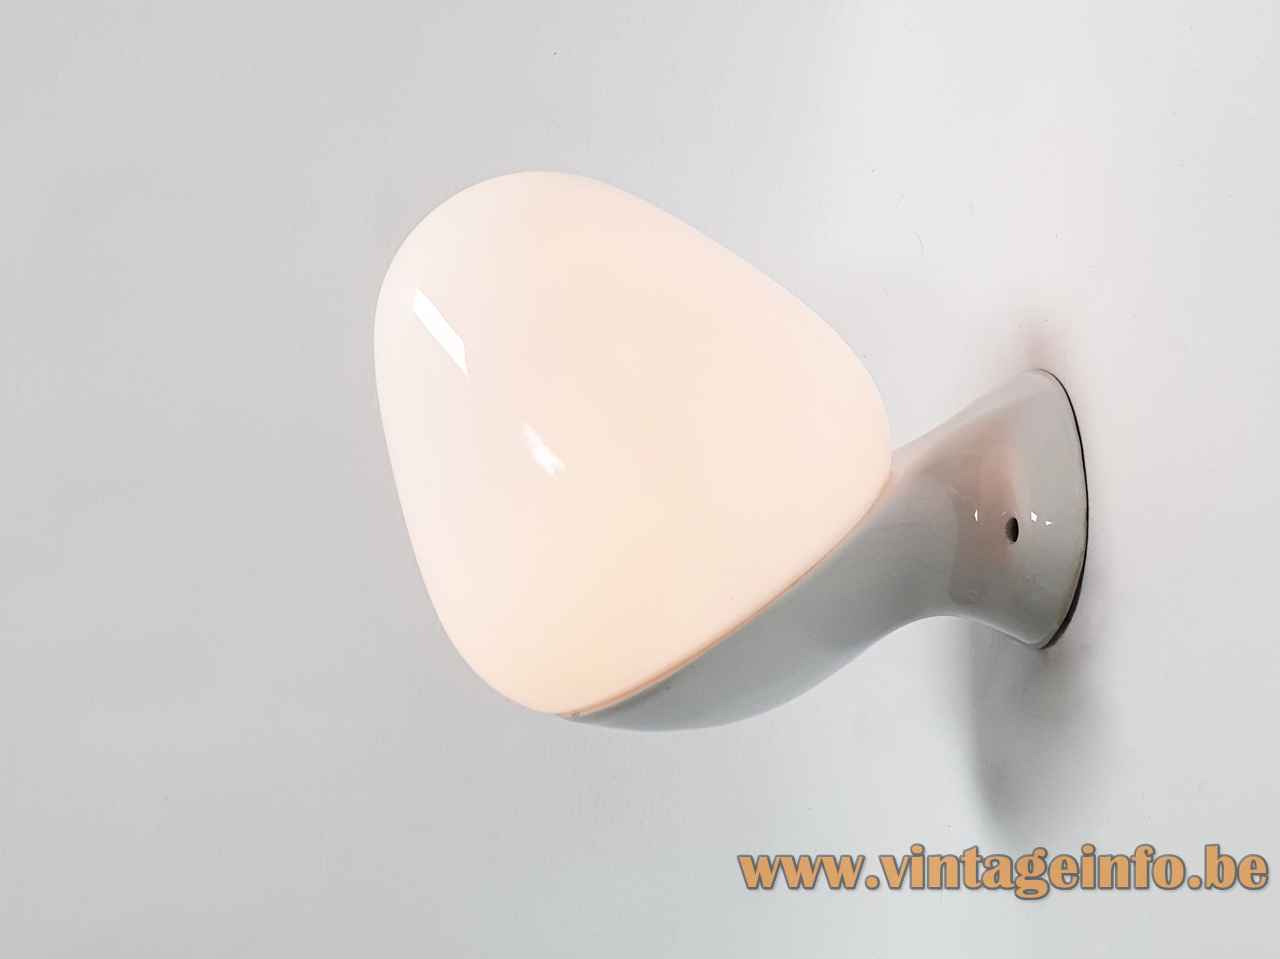 Wagenfeld WV 343 wall lamp white porcelain base mount opal glass lampshade 1950s 1960s Lindner Germany